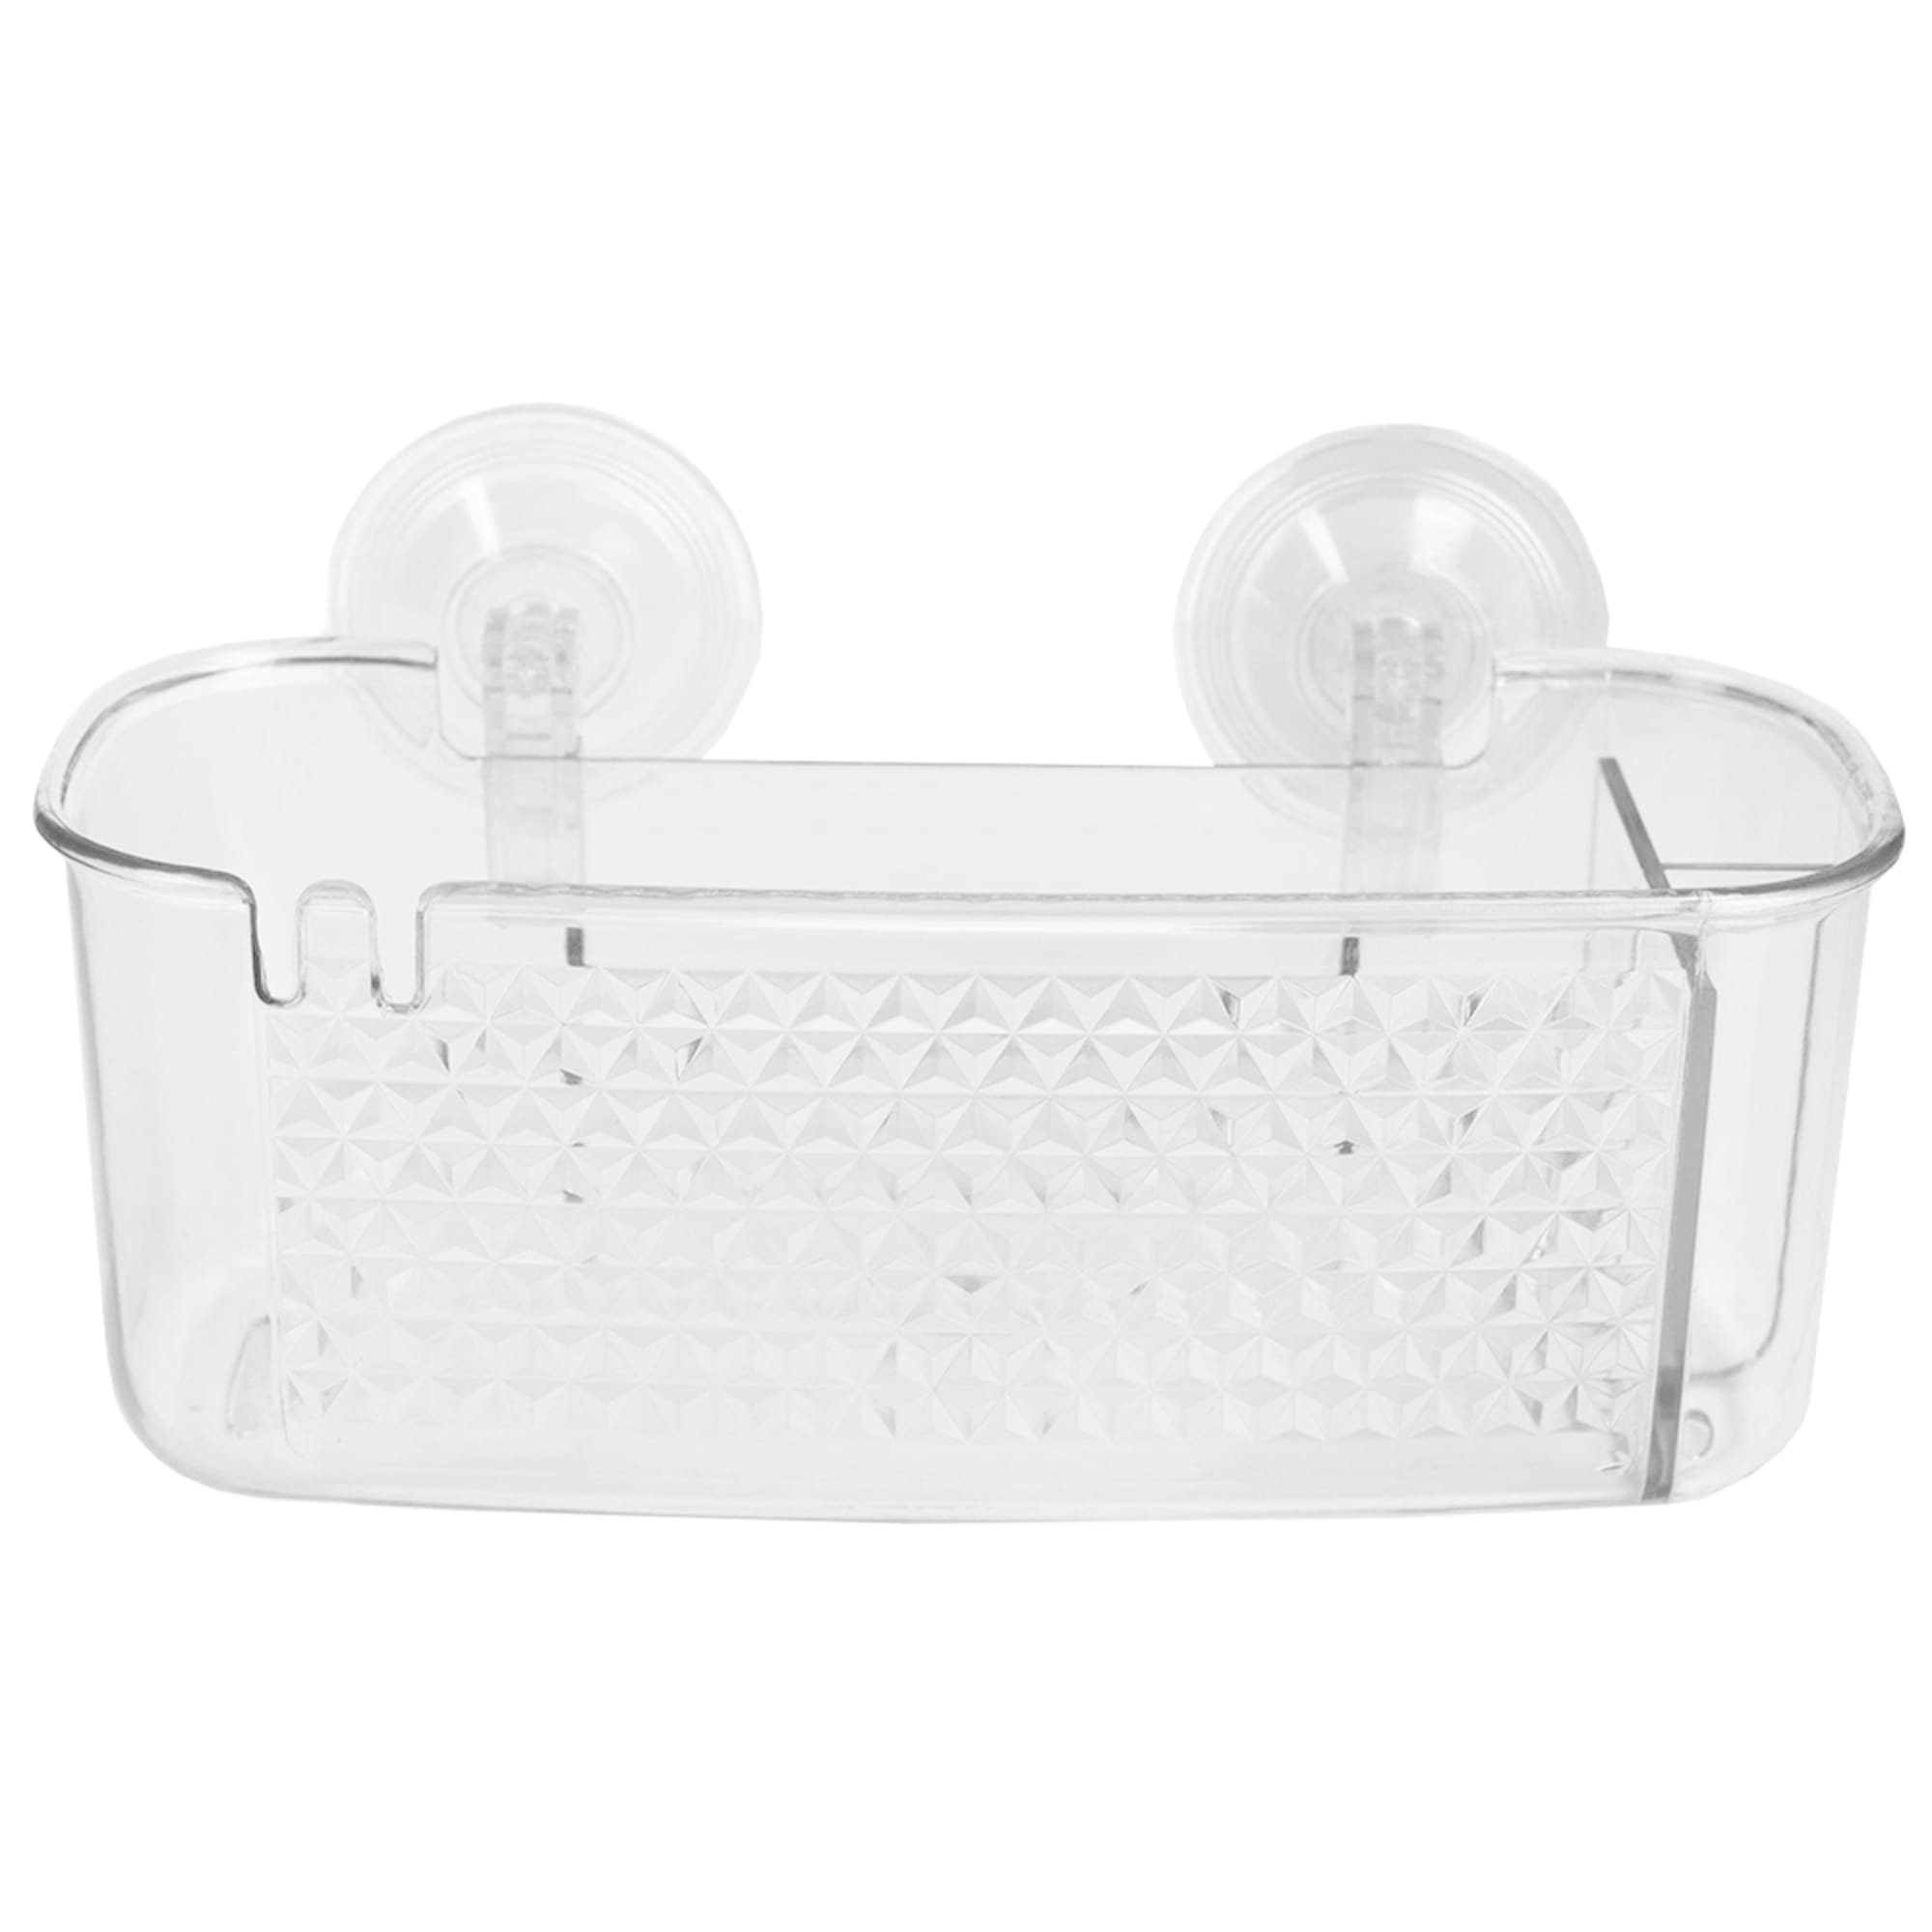 Home Basics Large Cubic Patterned Plastic Shower Caddy with Suction Cups, Clear $4.00 EACH, CASE PACK OF 24